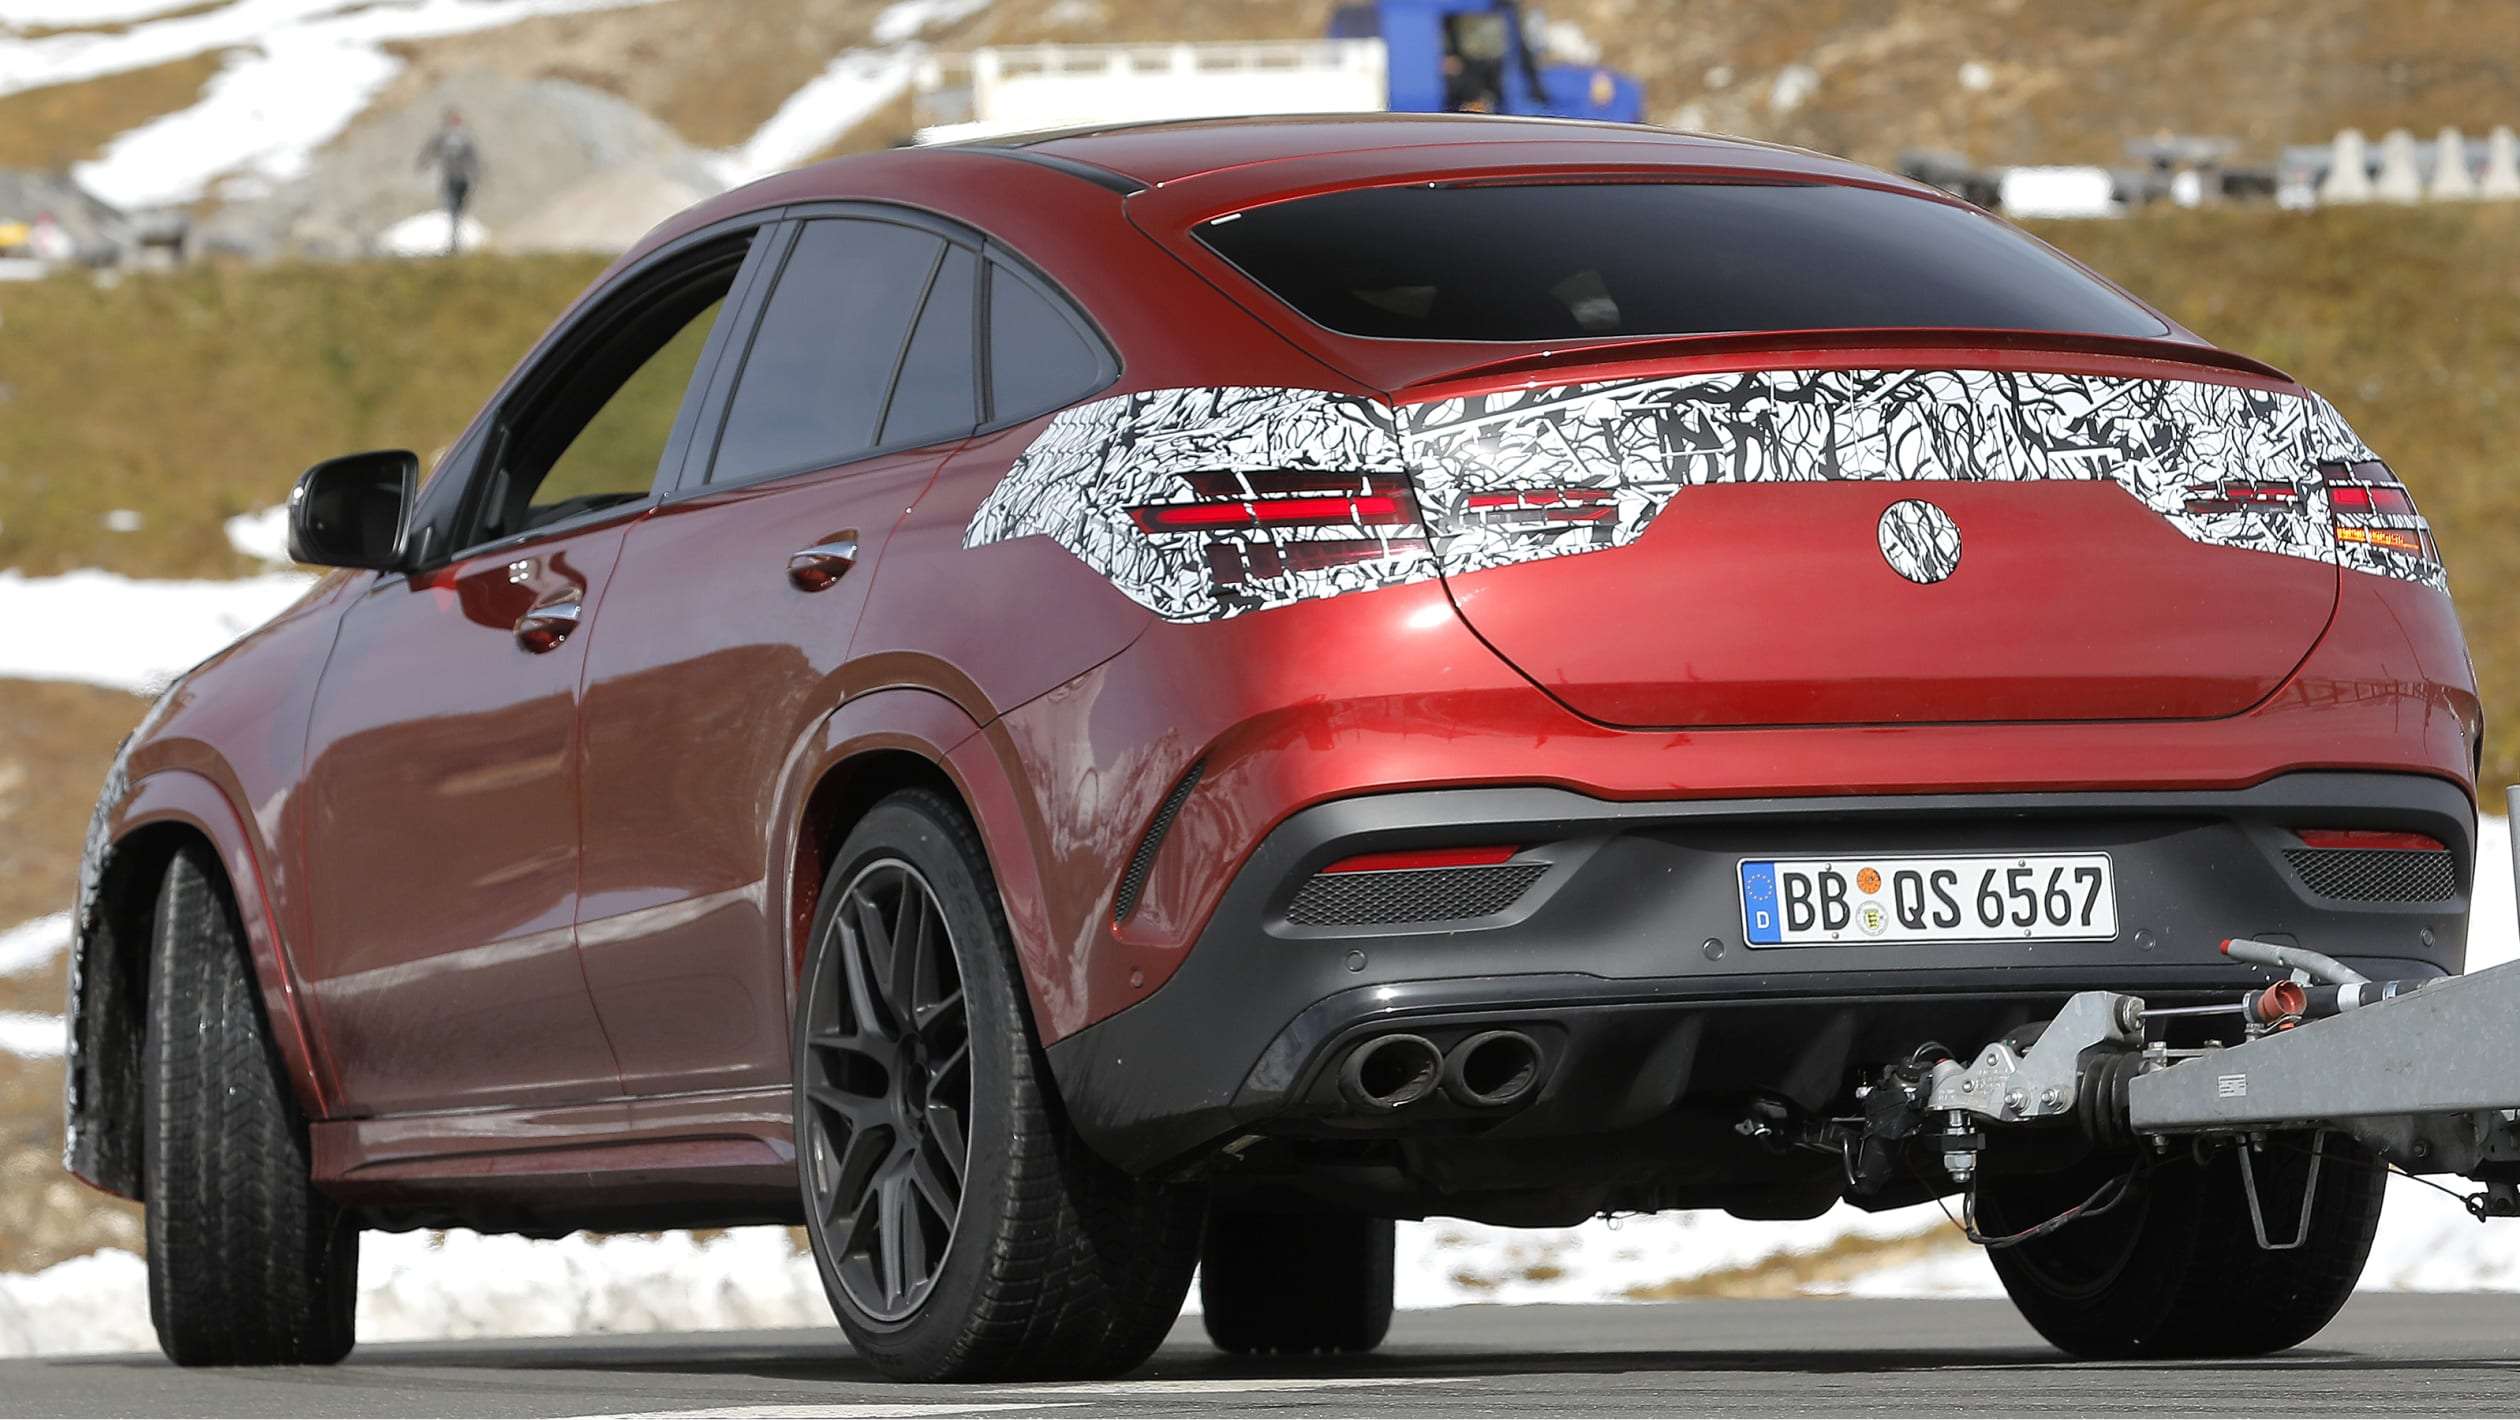 Mercedes GLE Coupe testing - rear